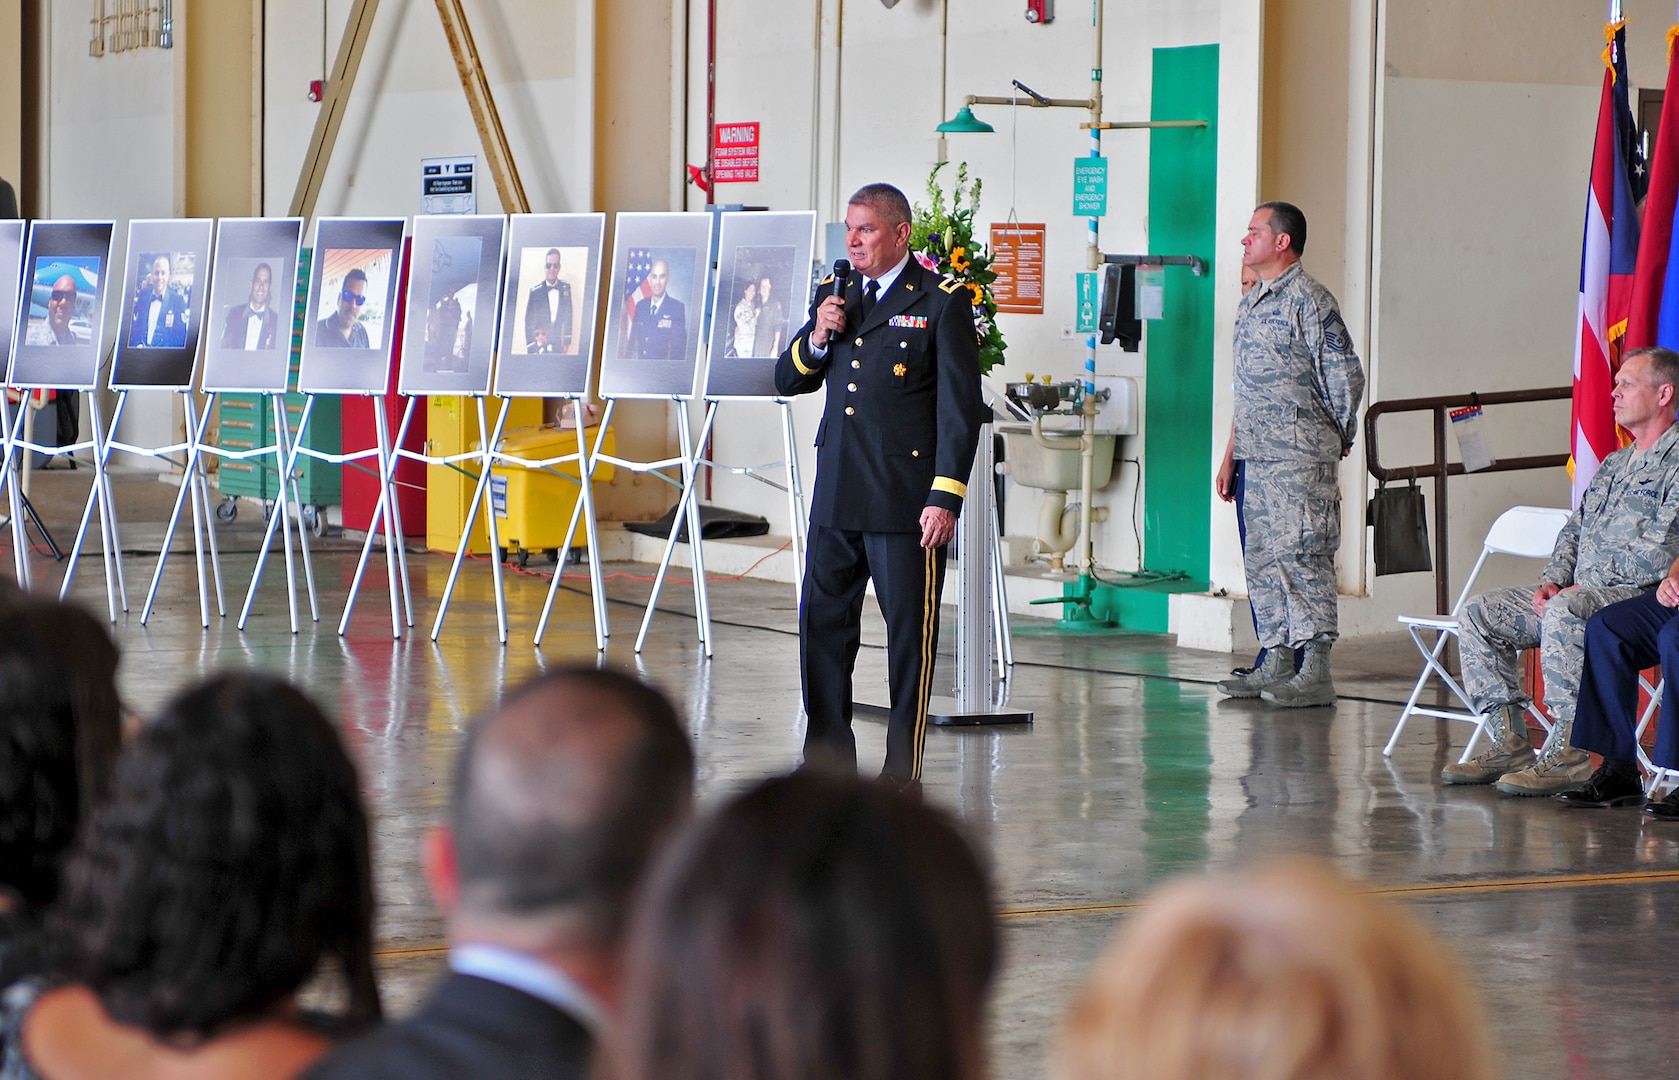 Puerto Rico's adjutant general, Brig. Gen. Isobel Rivera, says, "It is important to take the time to reflect and internalize the difficult moments we are living," at the service May 2, 2018, in San Juan to honor the Airmen killed in a May 2 plane crash.